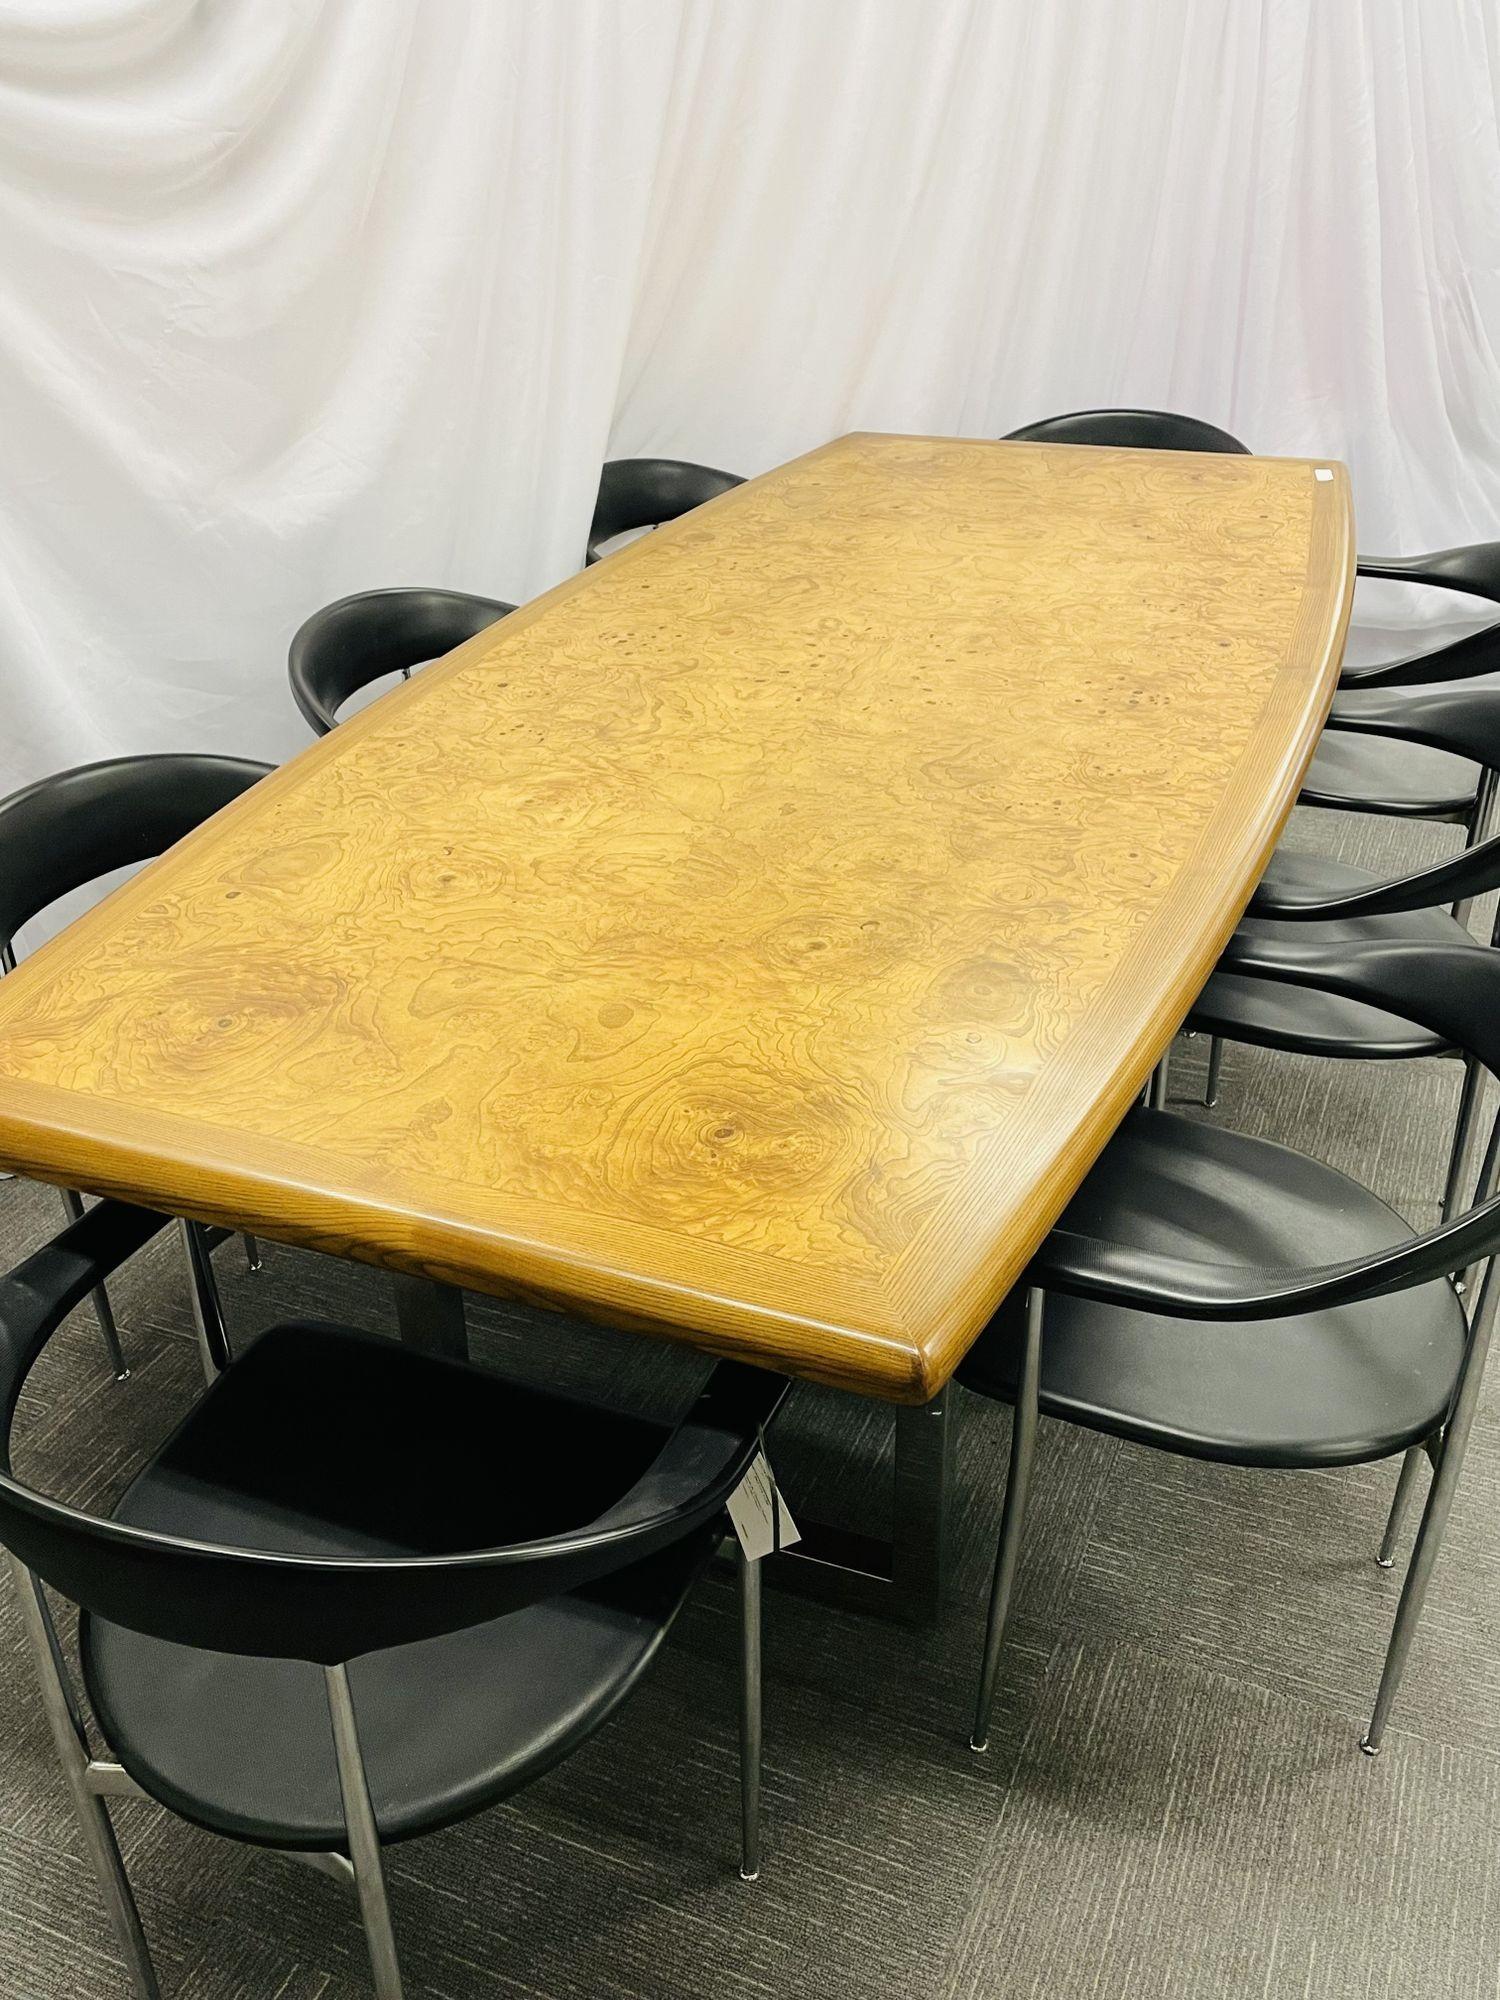 Mid-Century Modern dining / conference table, burl wood, chrome, American, 1960s
 
A sleek and stylish Milo Baughman Style Mid-Century Modern burl wood dining room table on a chrome base.
 
Burl Wood, Chrome
American, 1960s
 
Narrows to 36 on